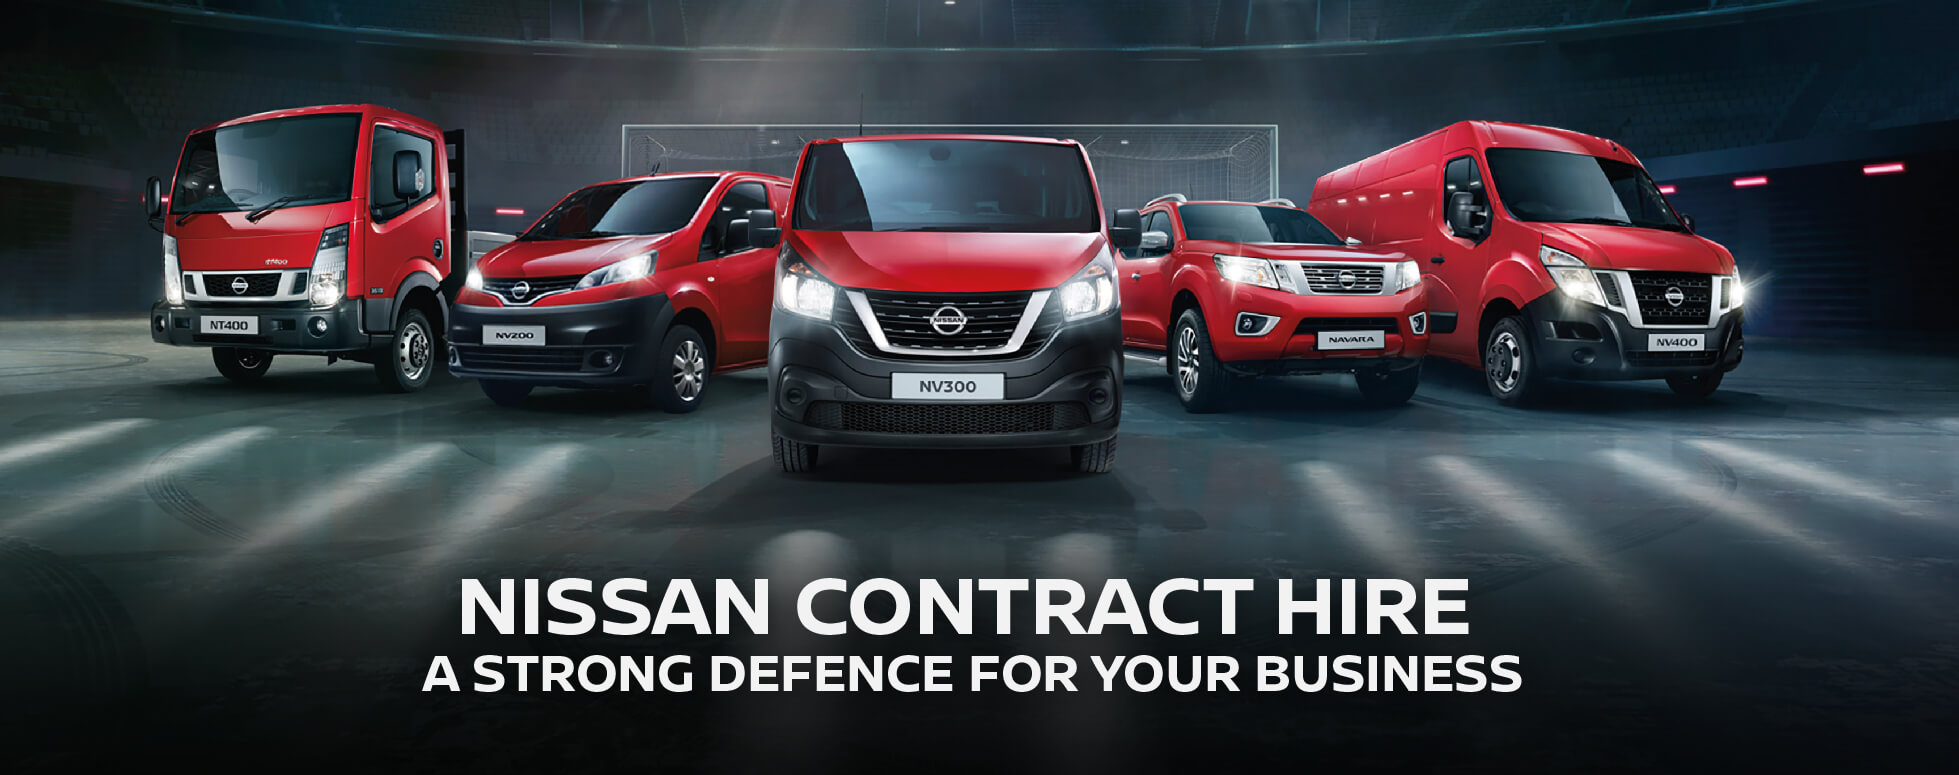 Nissan Contract Hire